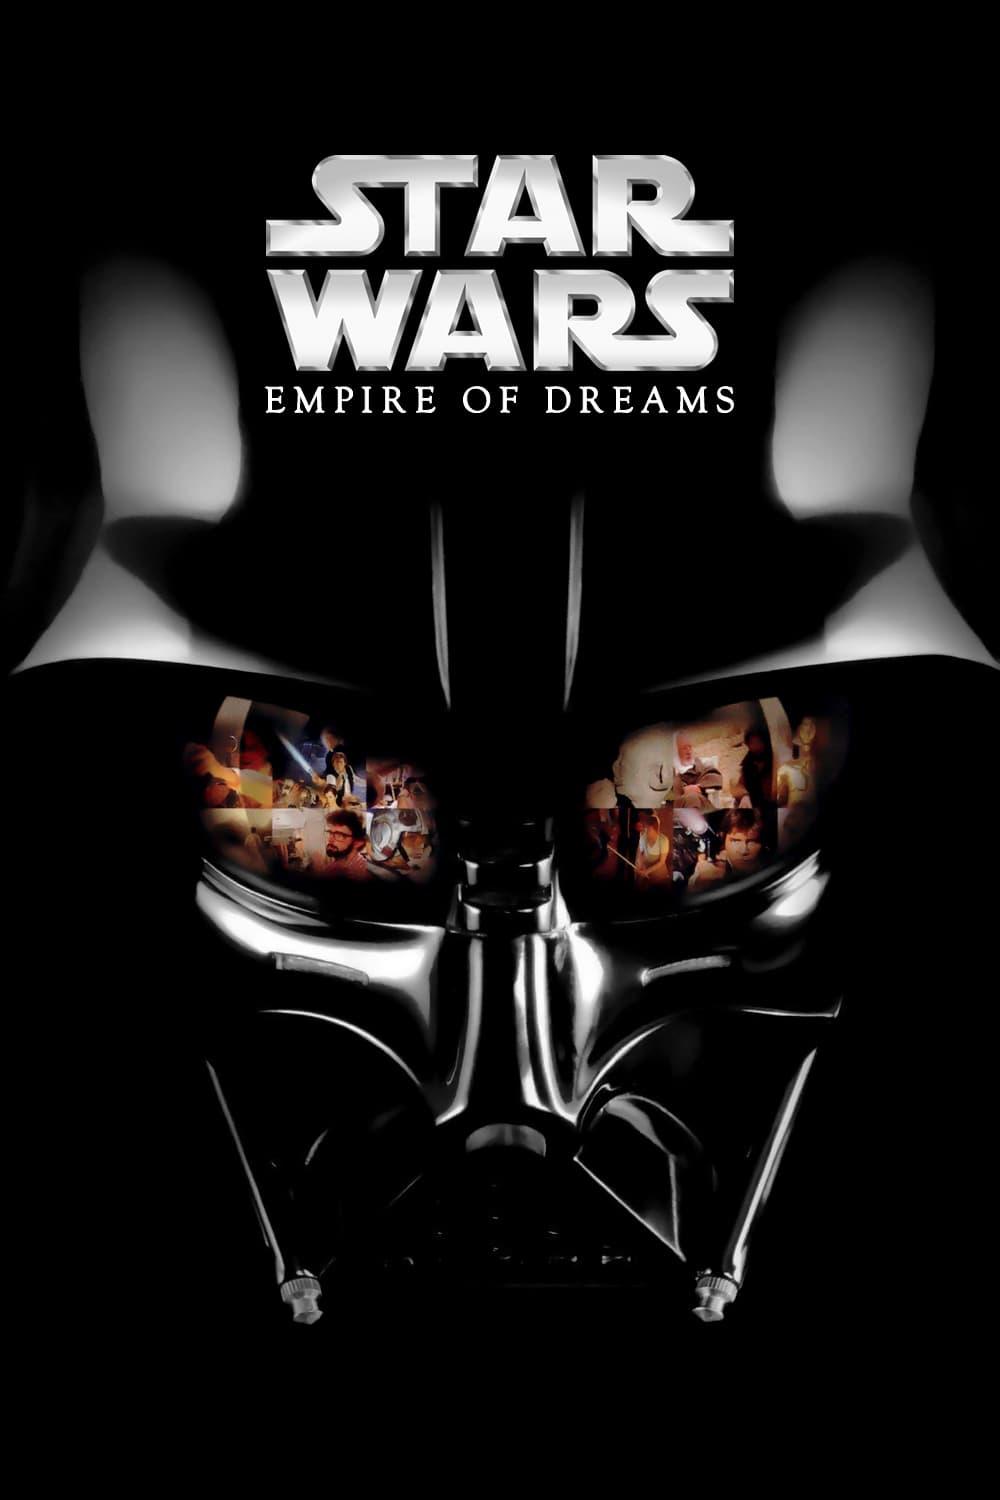 Empire of Dreams: The Story of the Star Wars Trilogy poster